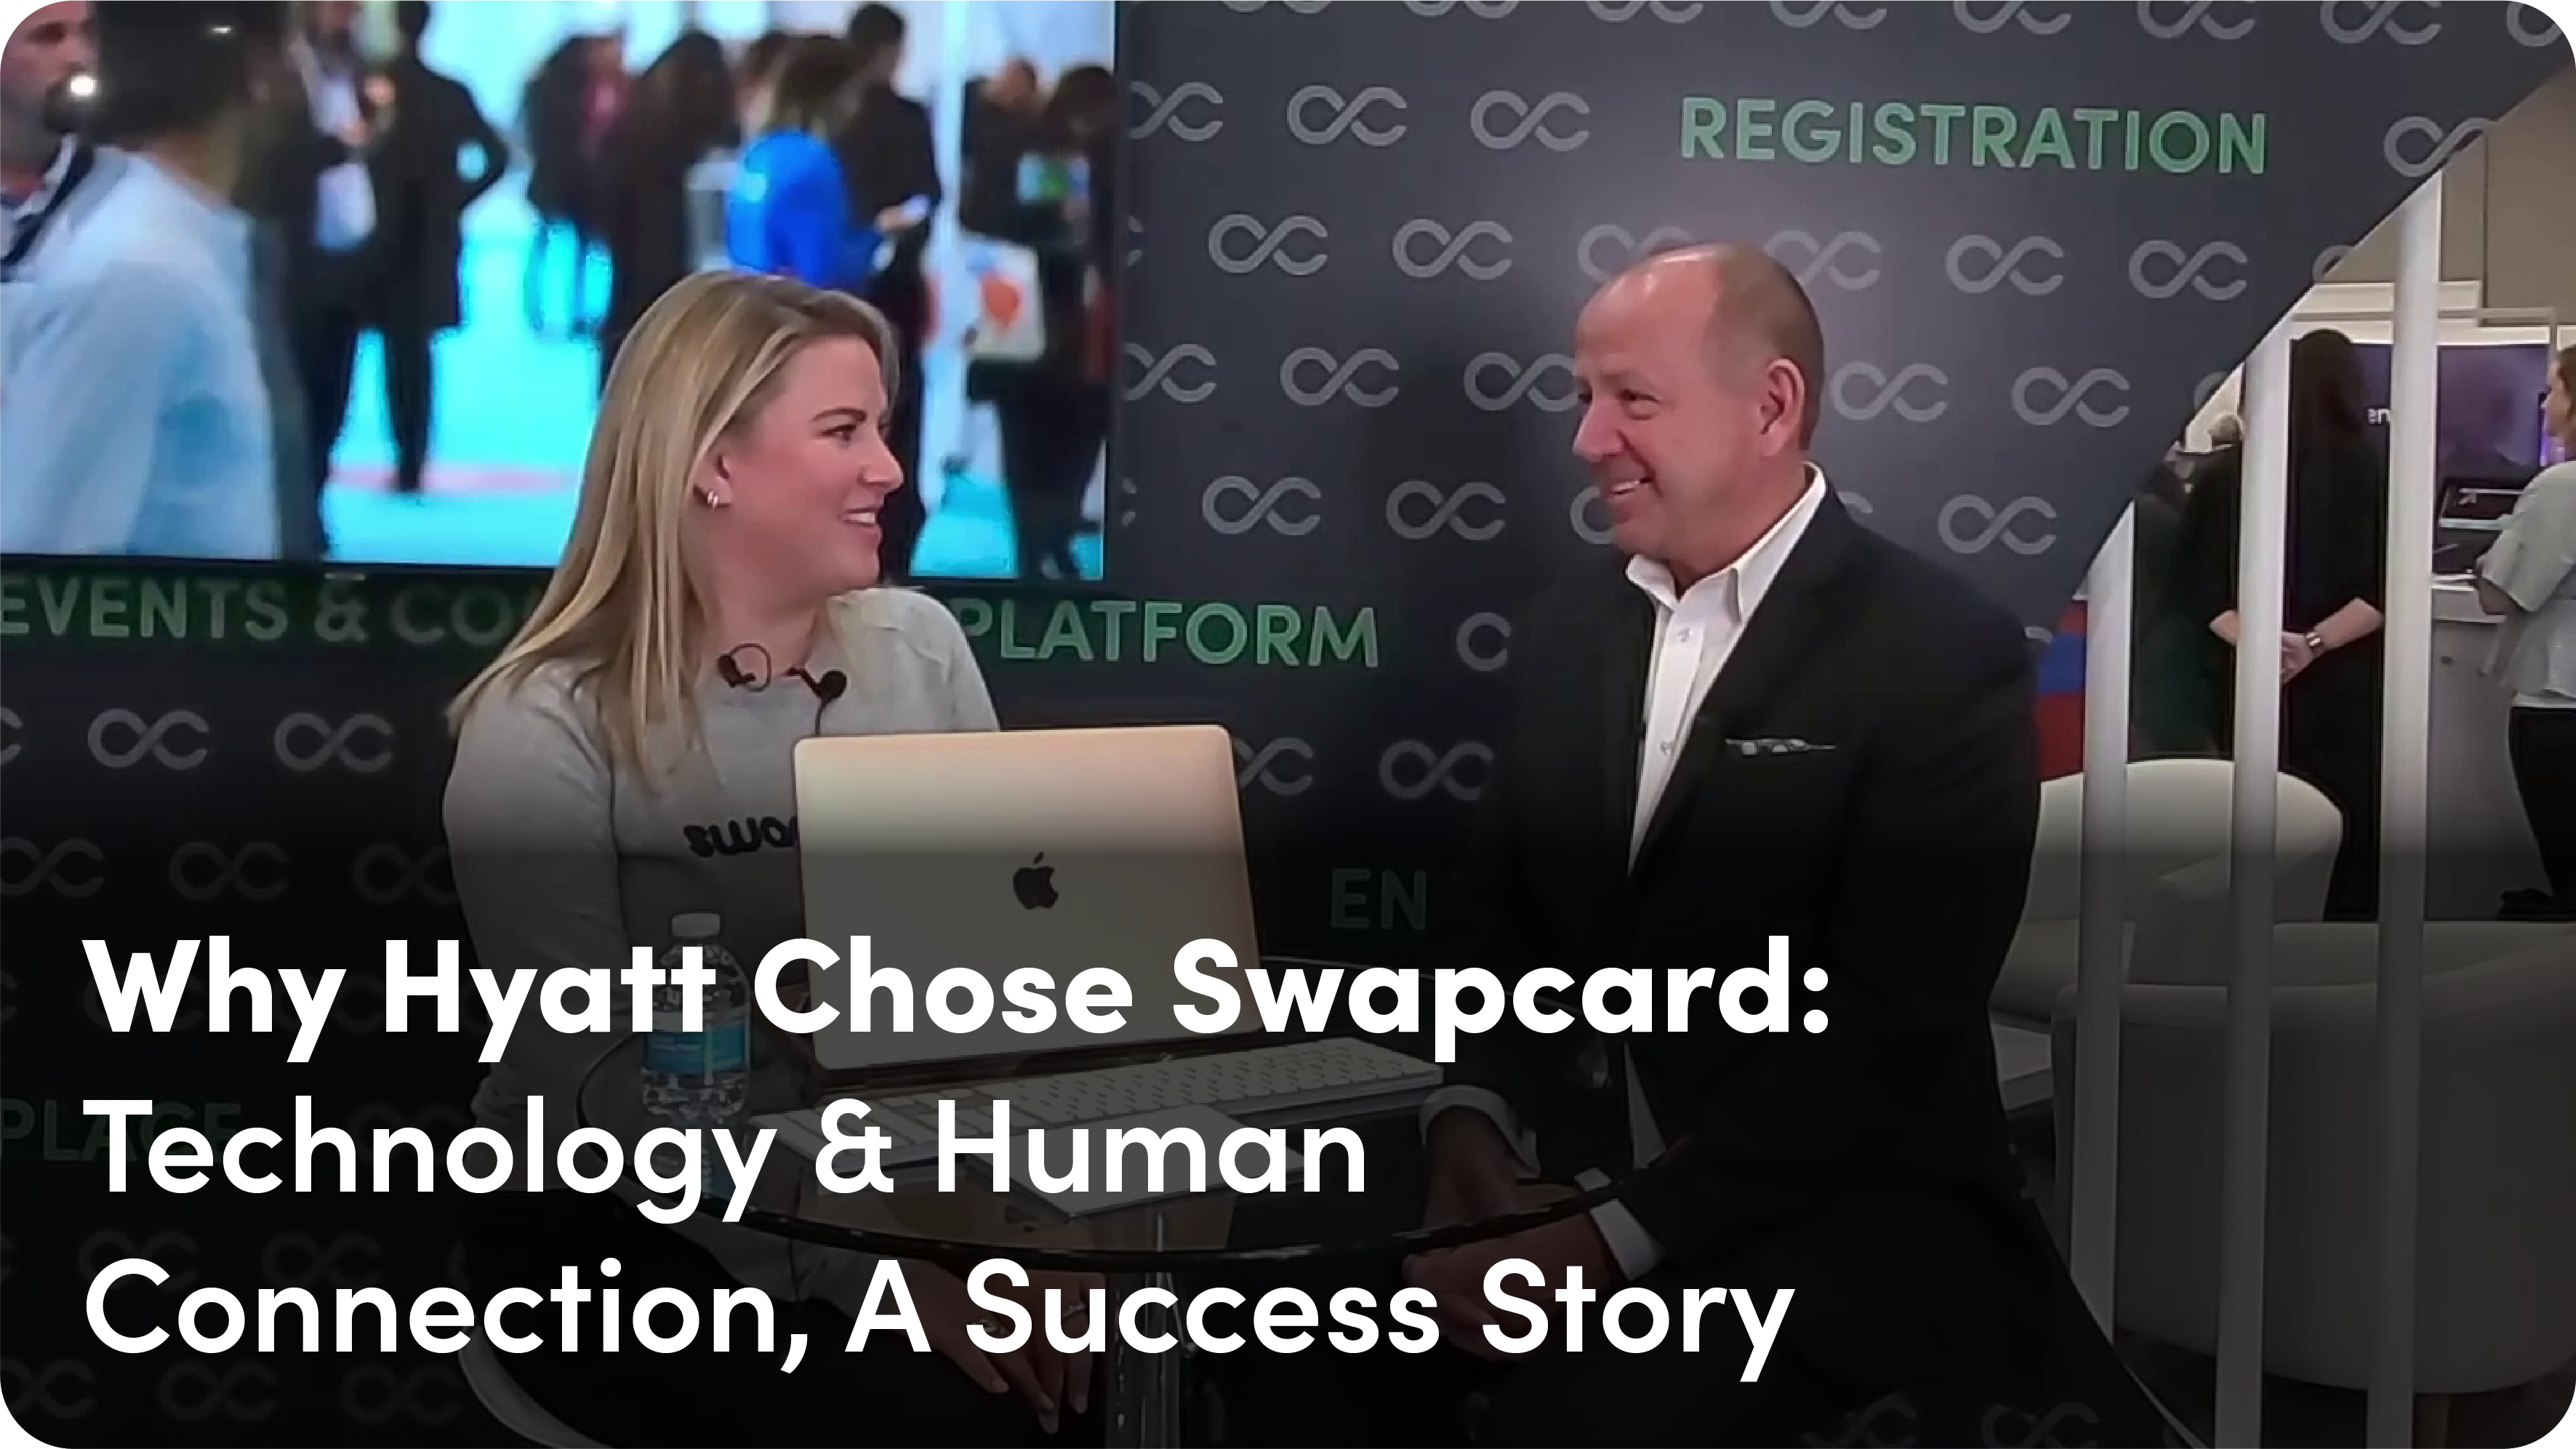 Why Hyatt Chose Swapcard: Technology & Human Connection, A Success Story